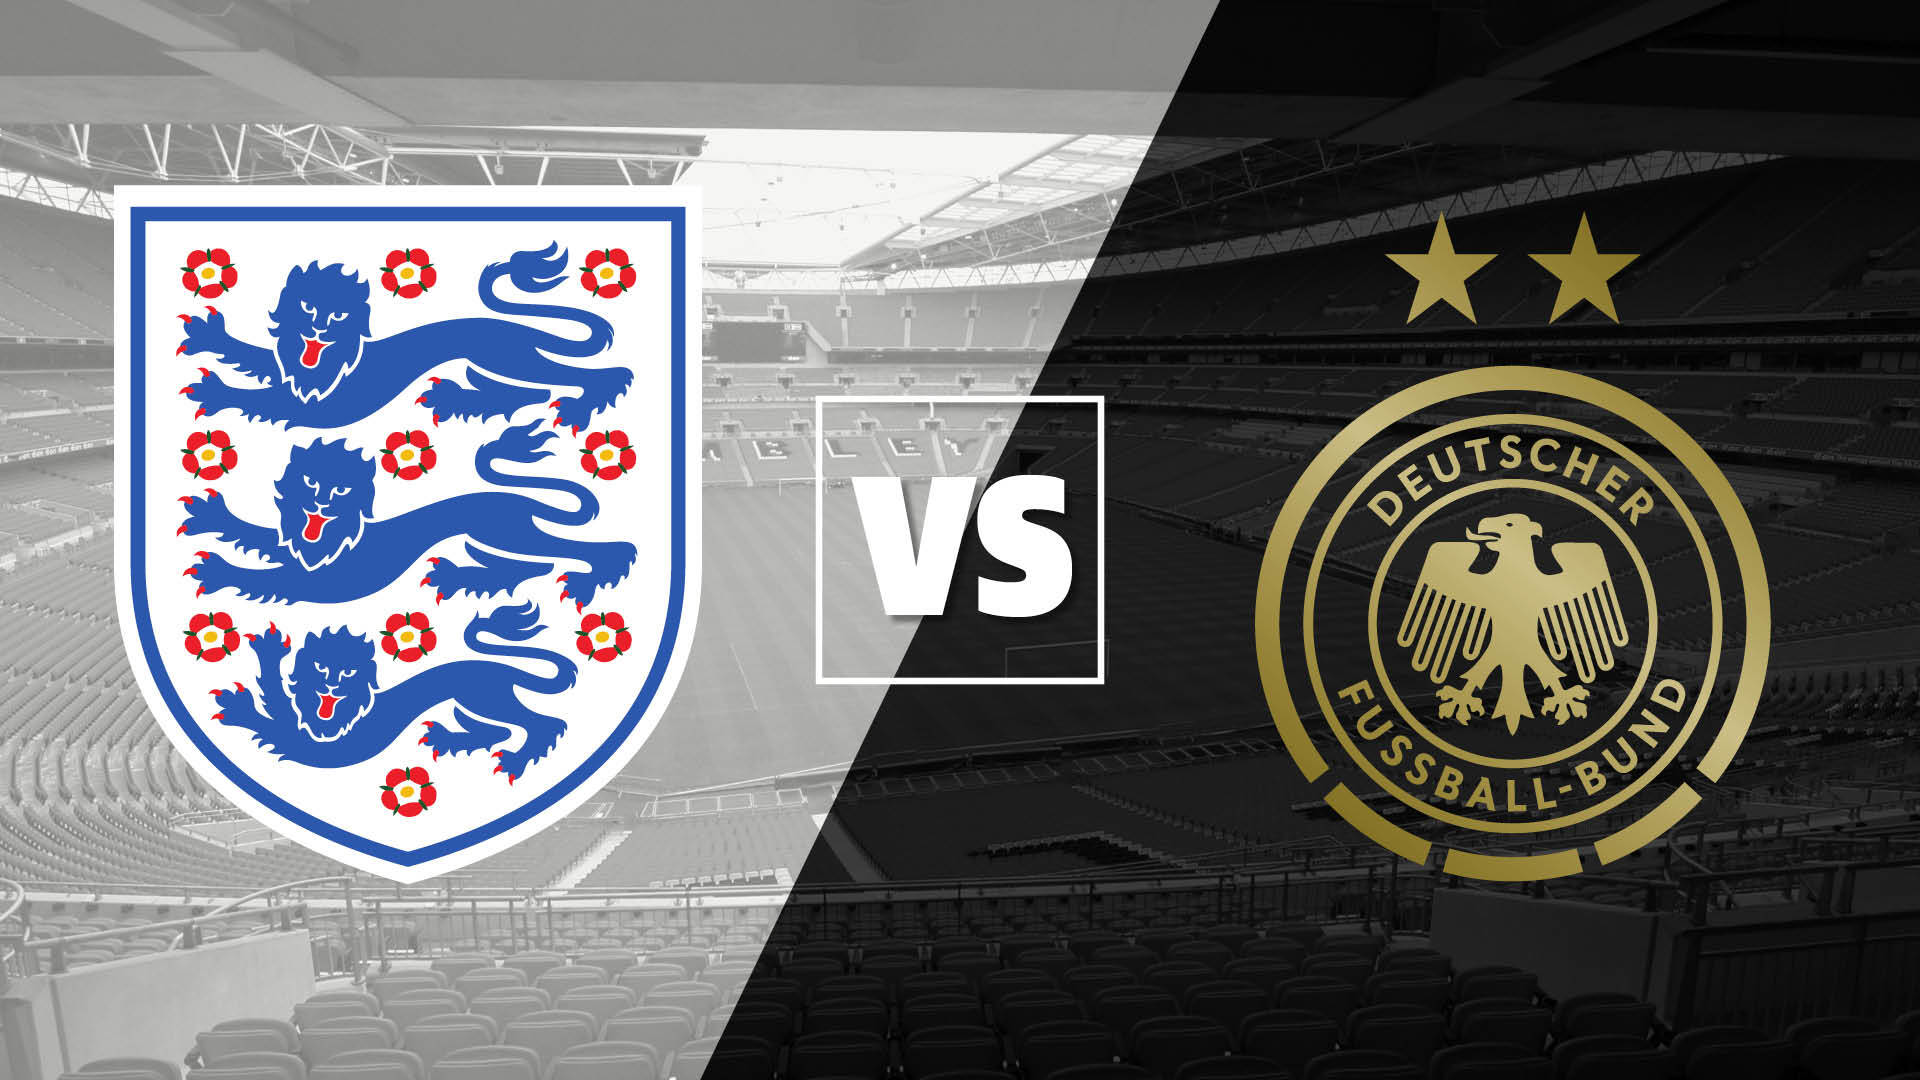 England Vs Germany Match Analysis and Betting Tips